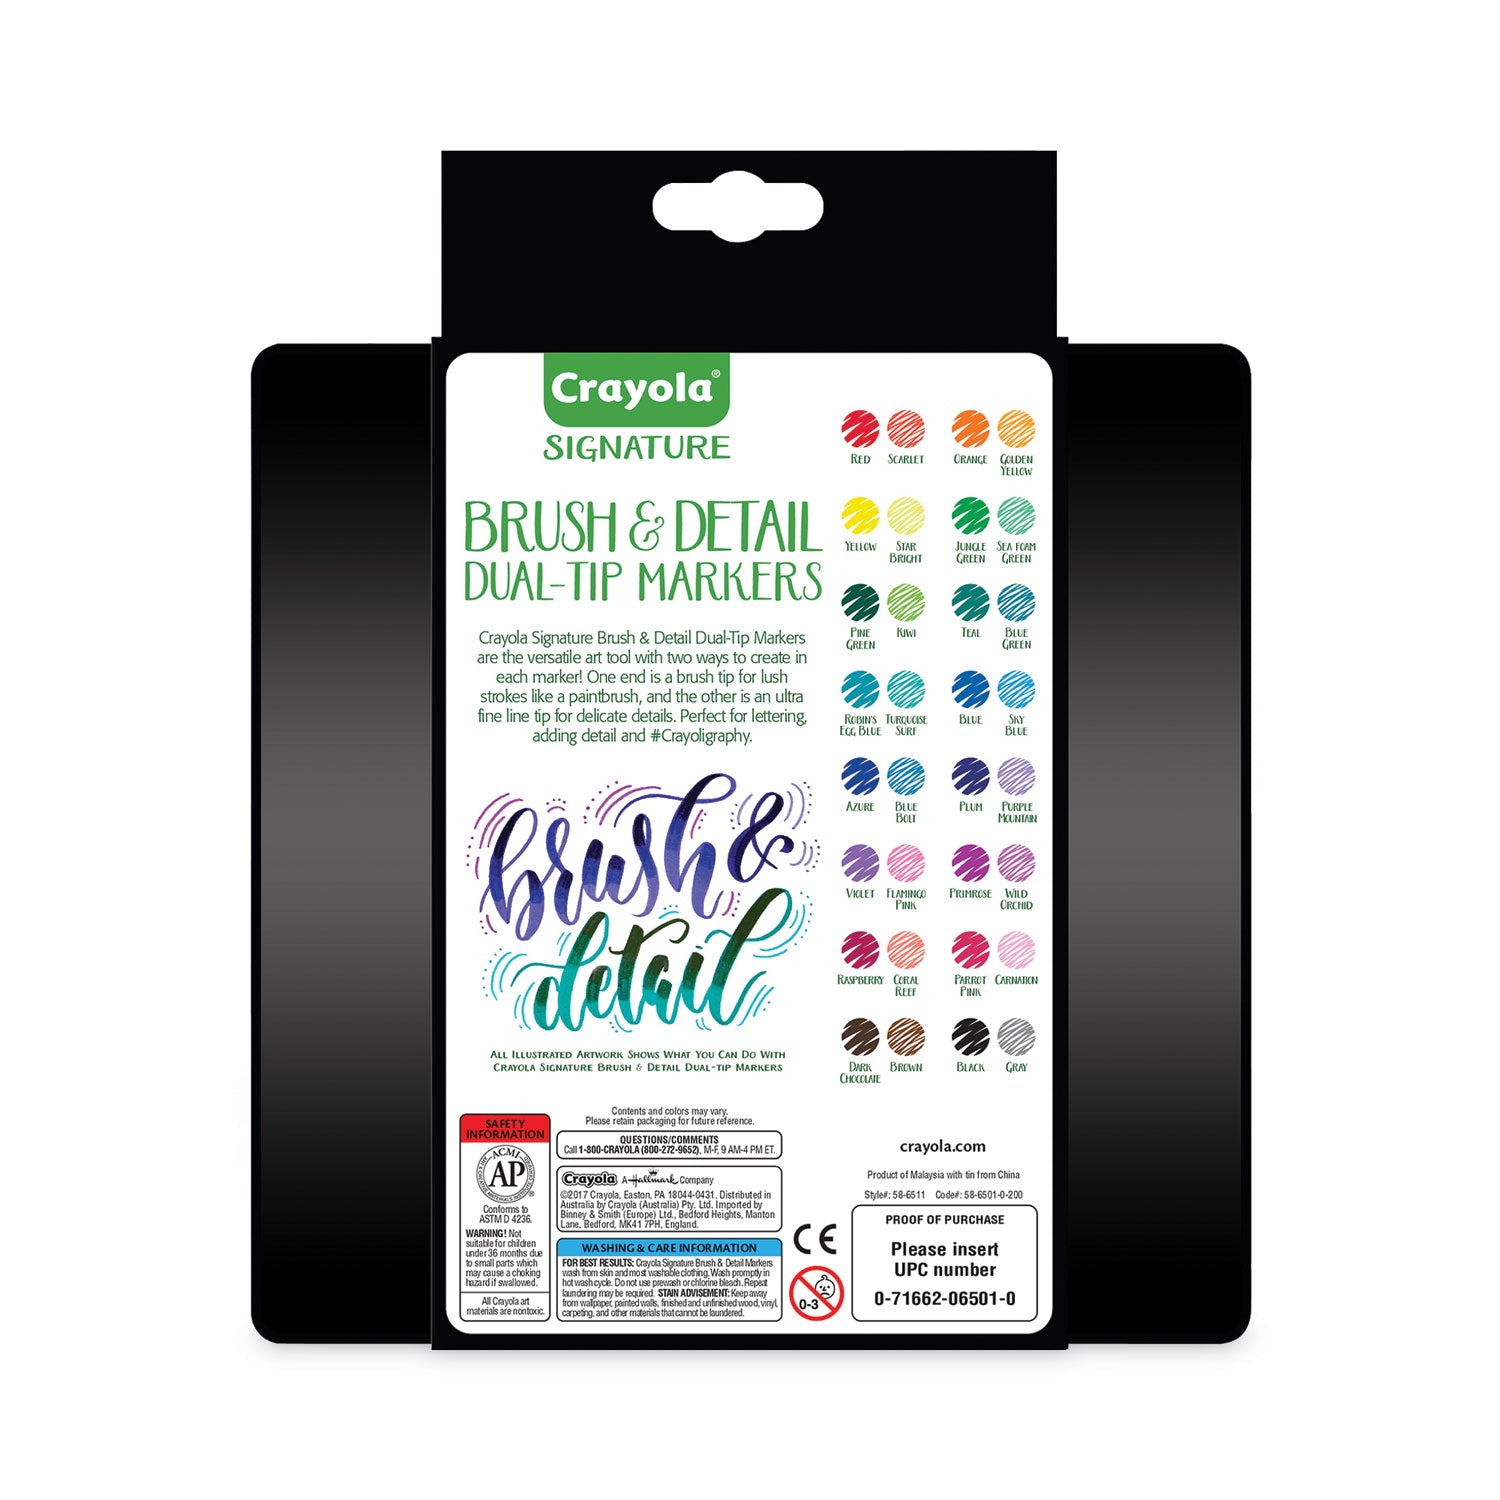 brush-and-detail-dual-ended-markers-extra-fine-brush-bullet-tips-assorted-colors-16-set_cyo586501 - 2